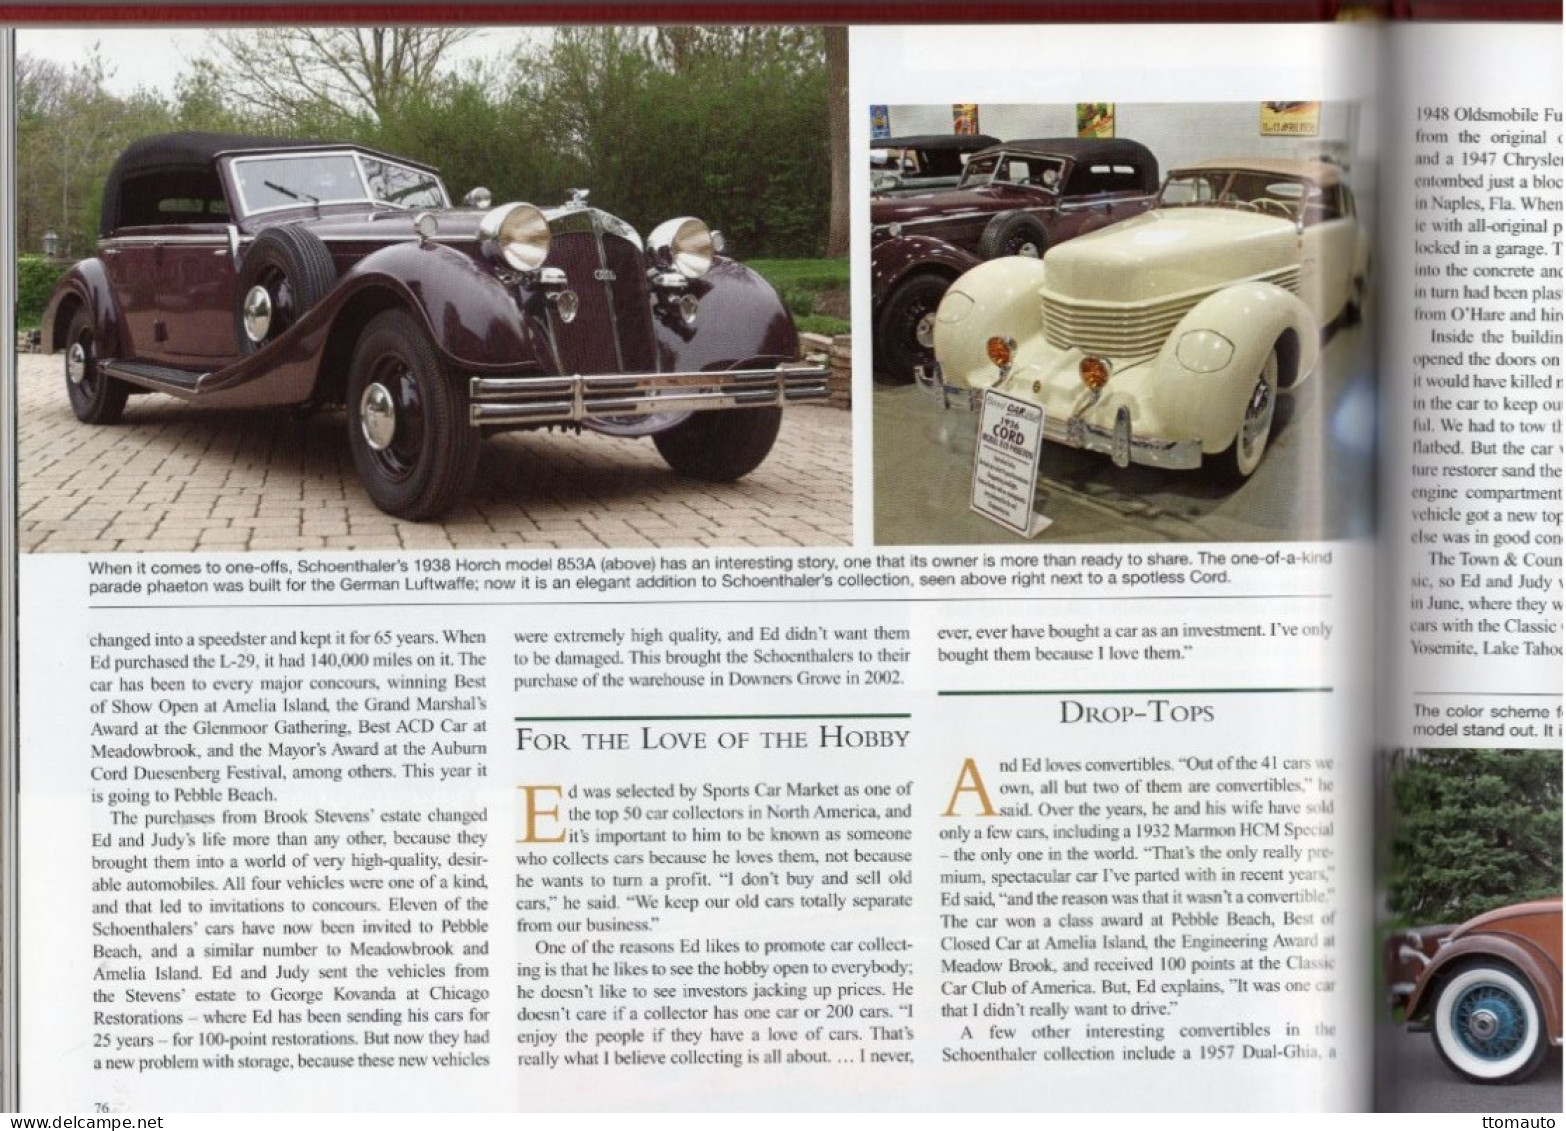 Automobile Quarterly Volume 49 Number 2 (Apr 2009) - Mercedes W165-Hudson-OSCA - FREE SHIPPING TO EUROPE & US - Transportation